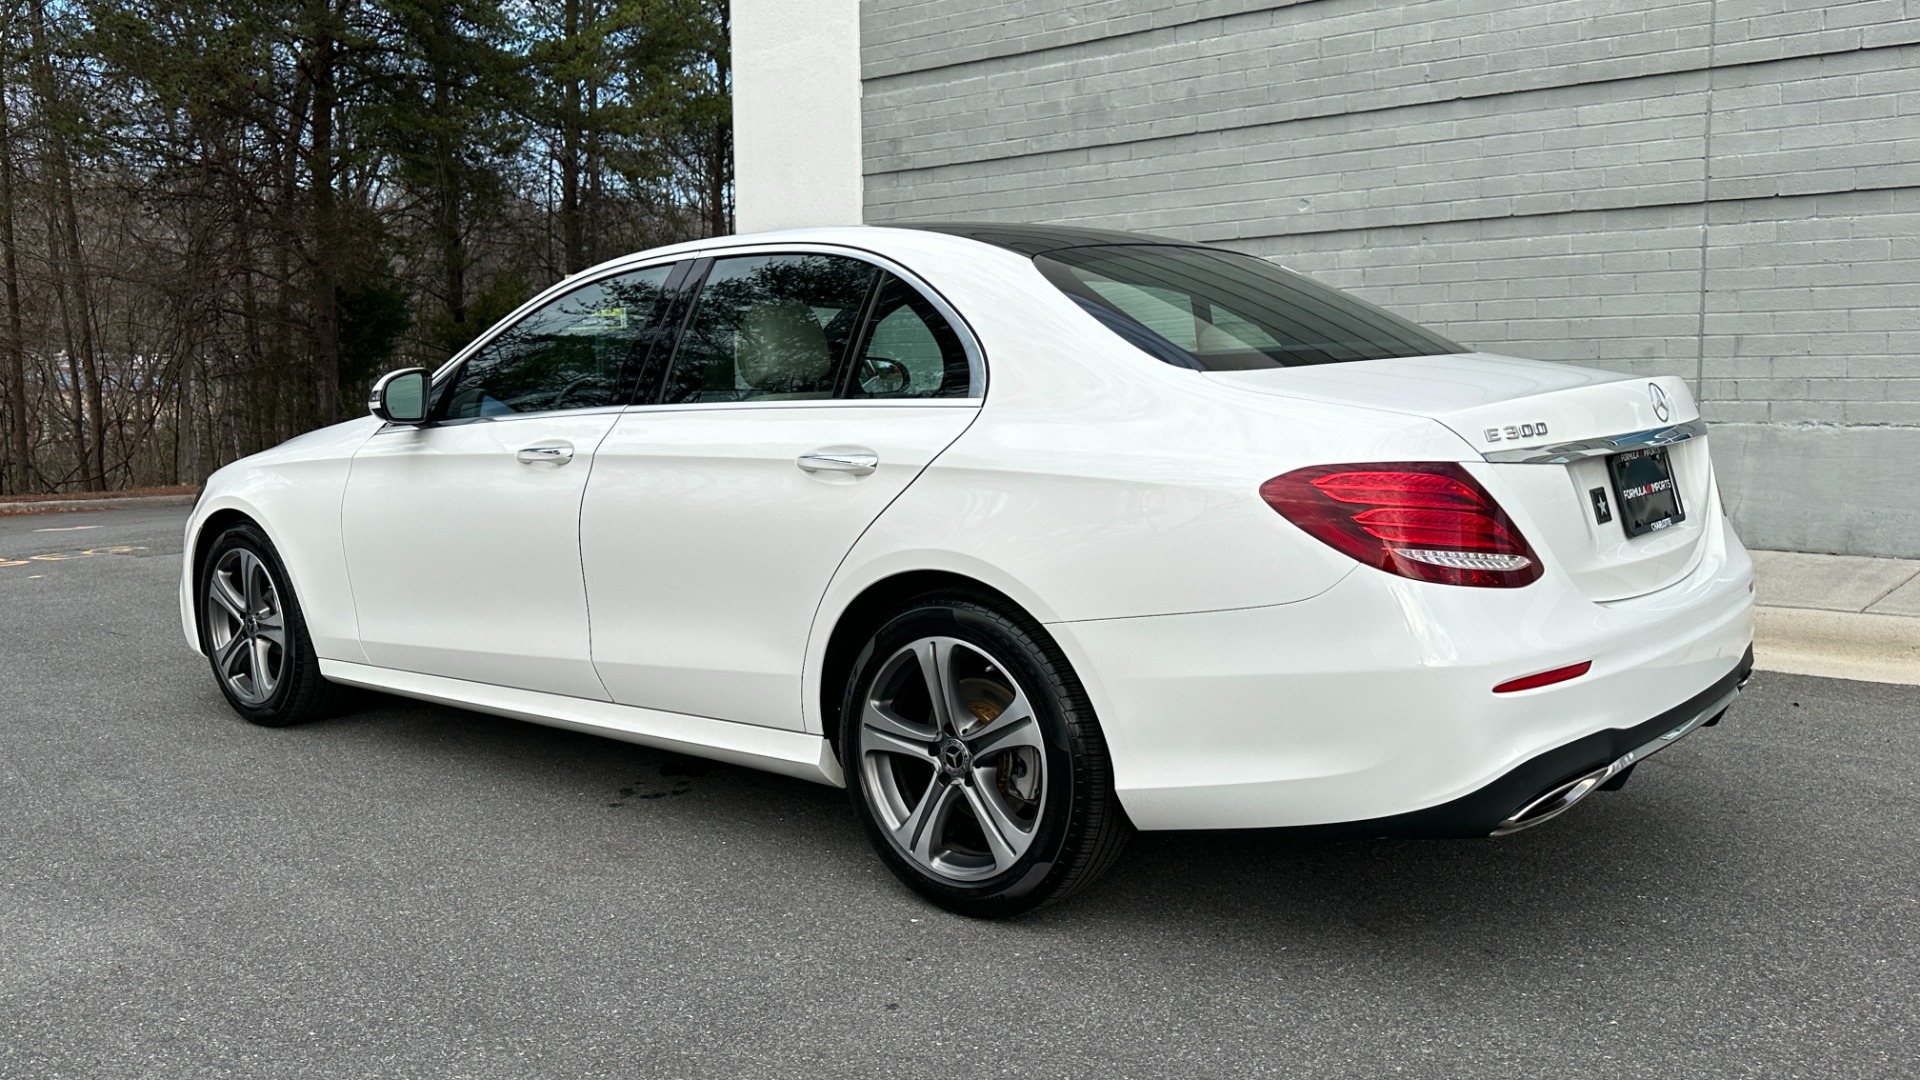 Used 2019 Mercedes-Benz E-Class E300 / PREMIUM PACKAGE / BLIND SPOT / BURMESTER SOUND / HEATED STEERING for sale $35,400 at Formula Imports in Charlotte NC 28227 7